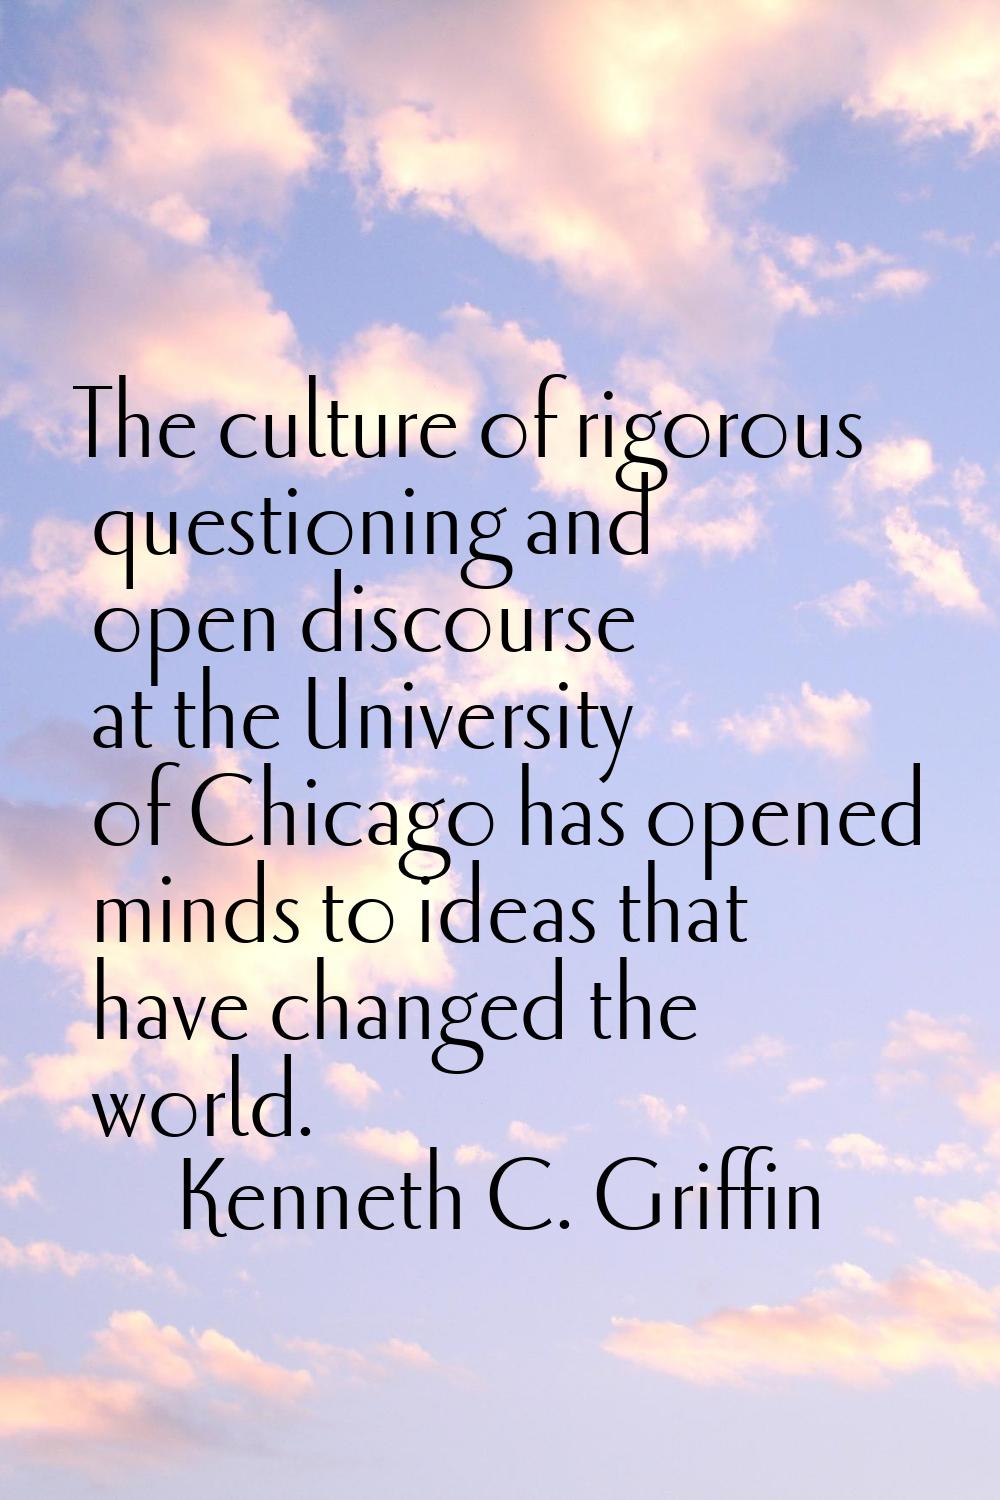 The culture of rigorous questioning and open discourse at the University of Chicago has opened mind